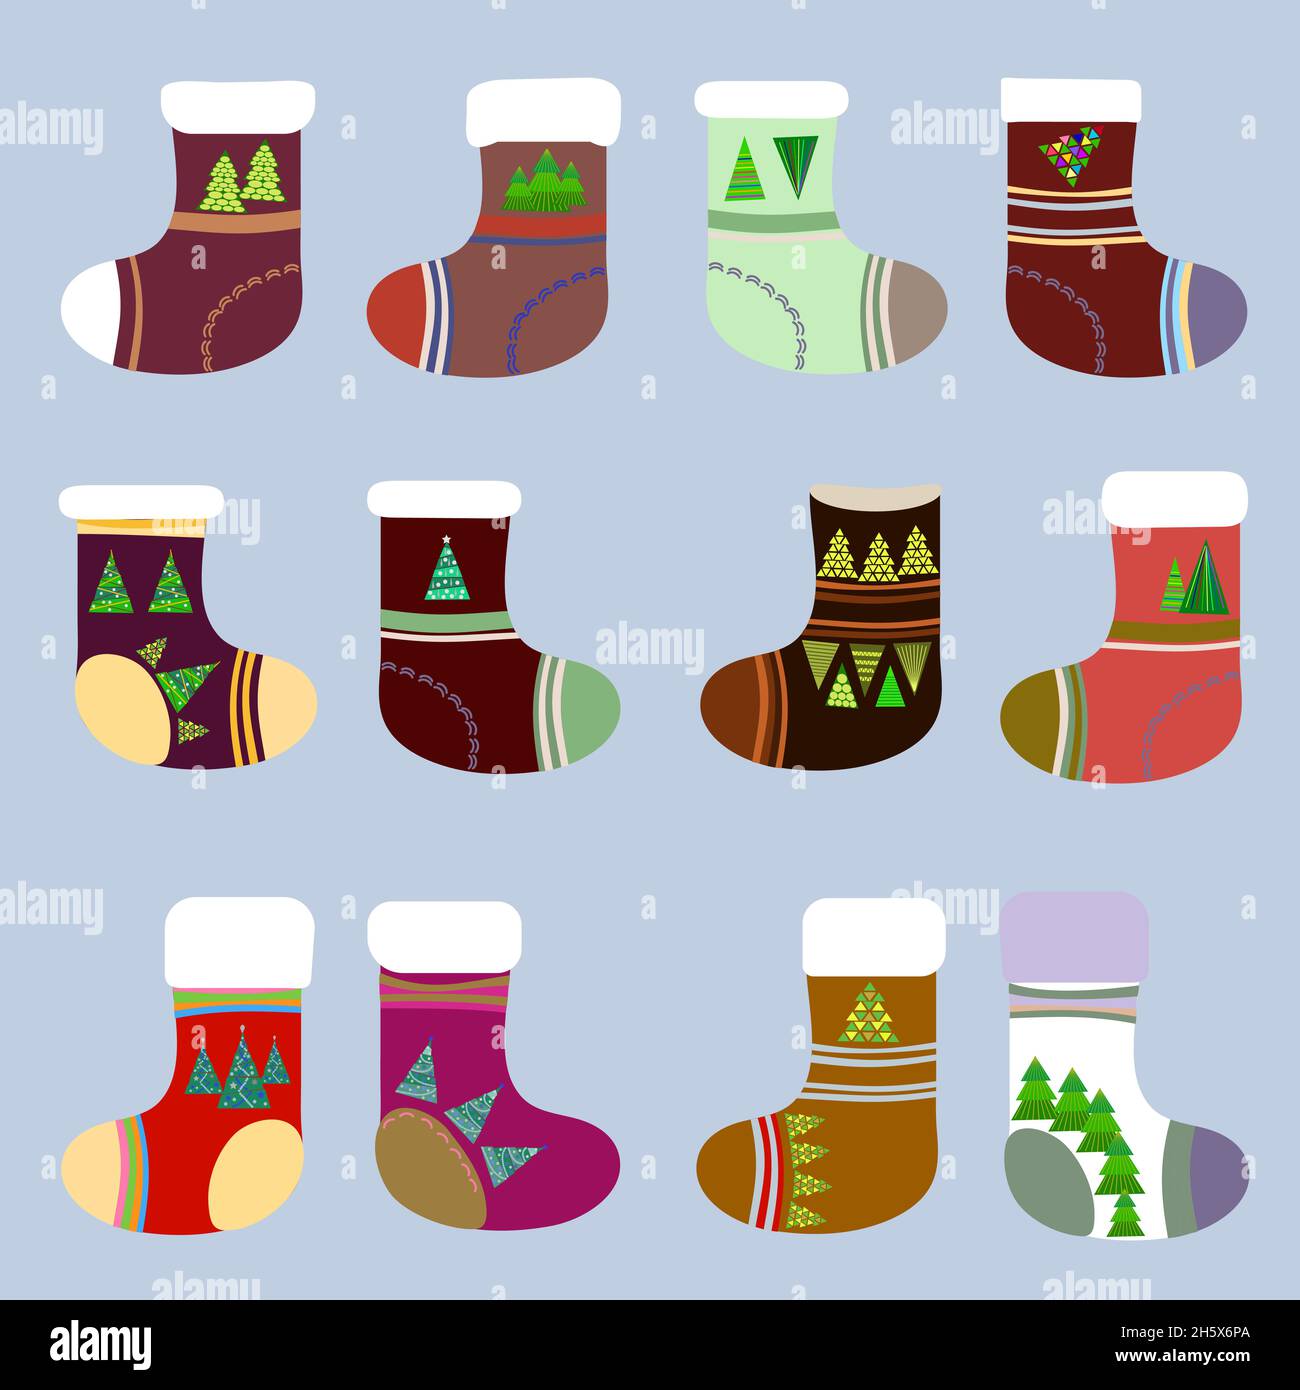 Set of Christmas socks decorated with Christmas trees Stock Vector